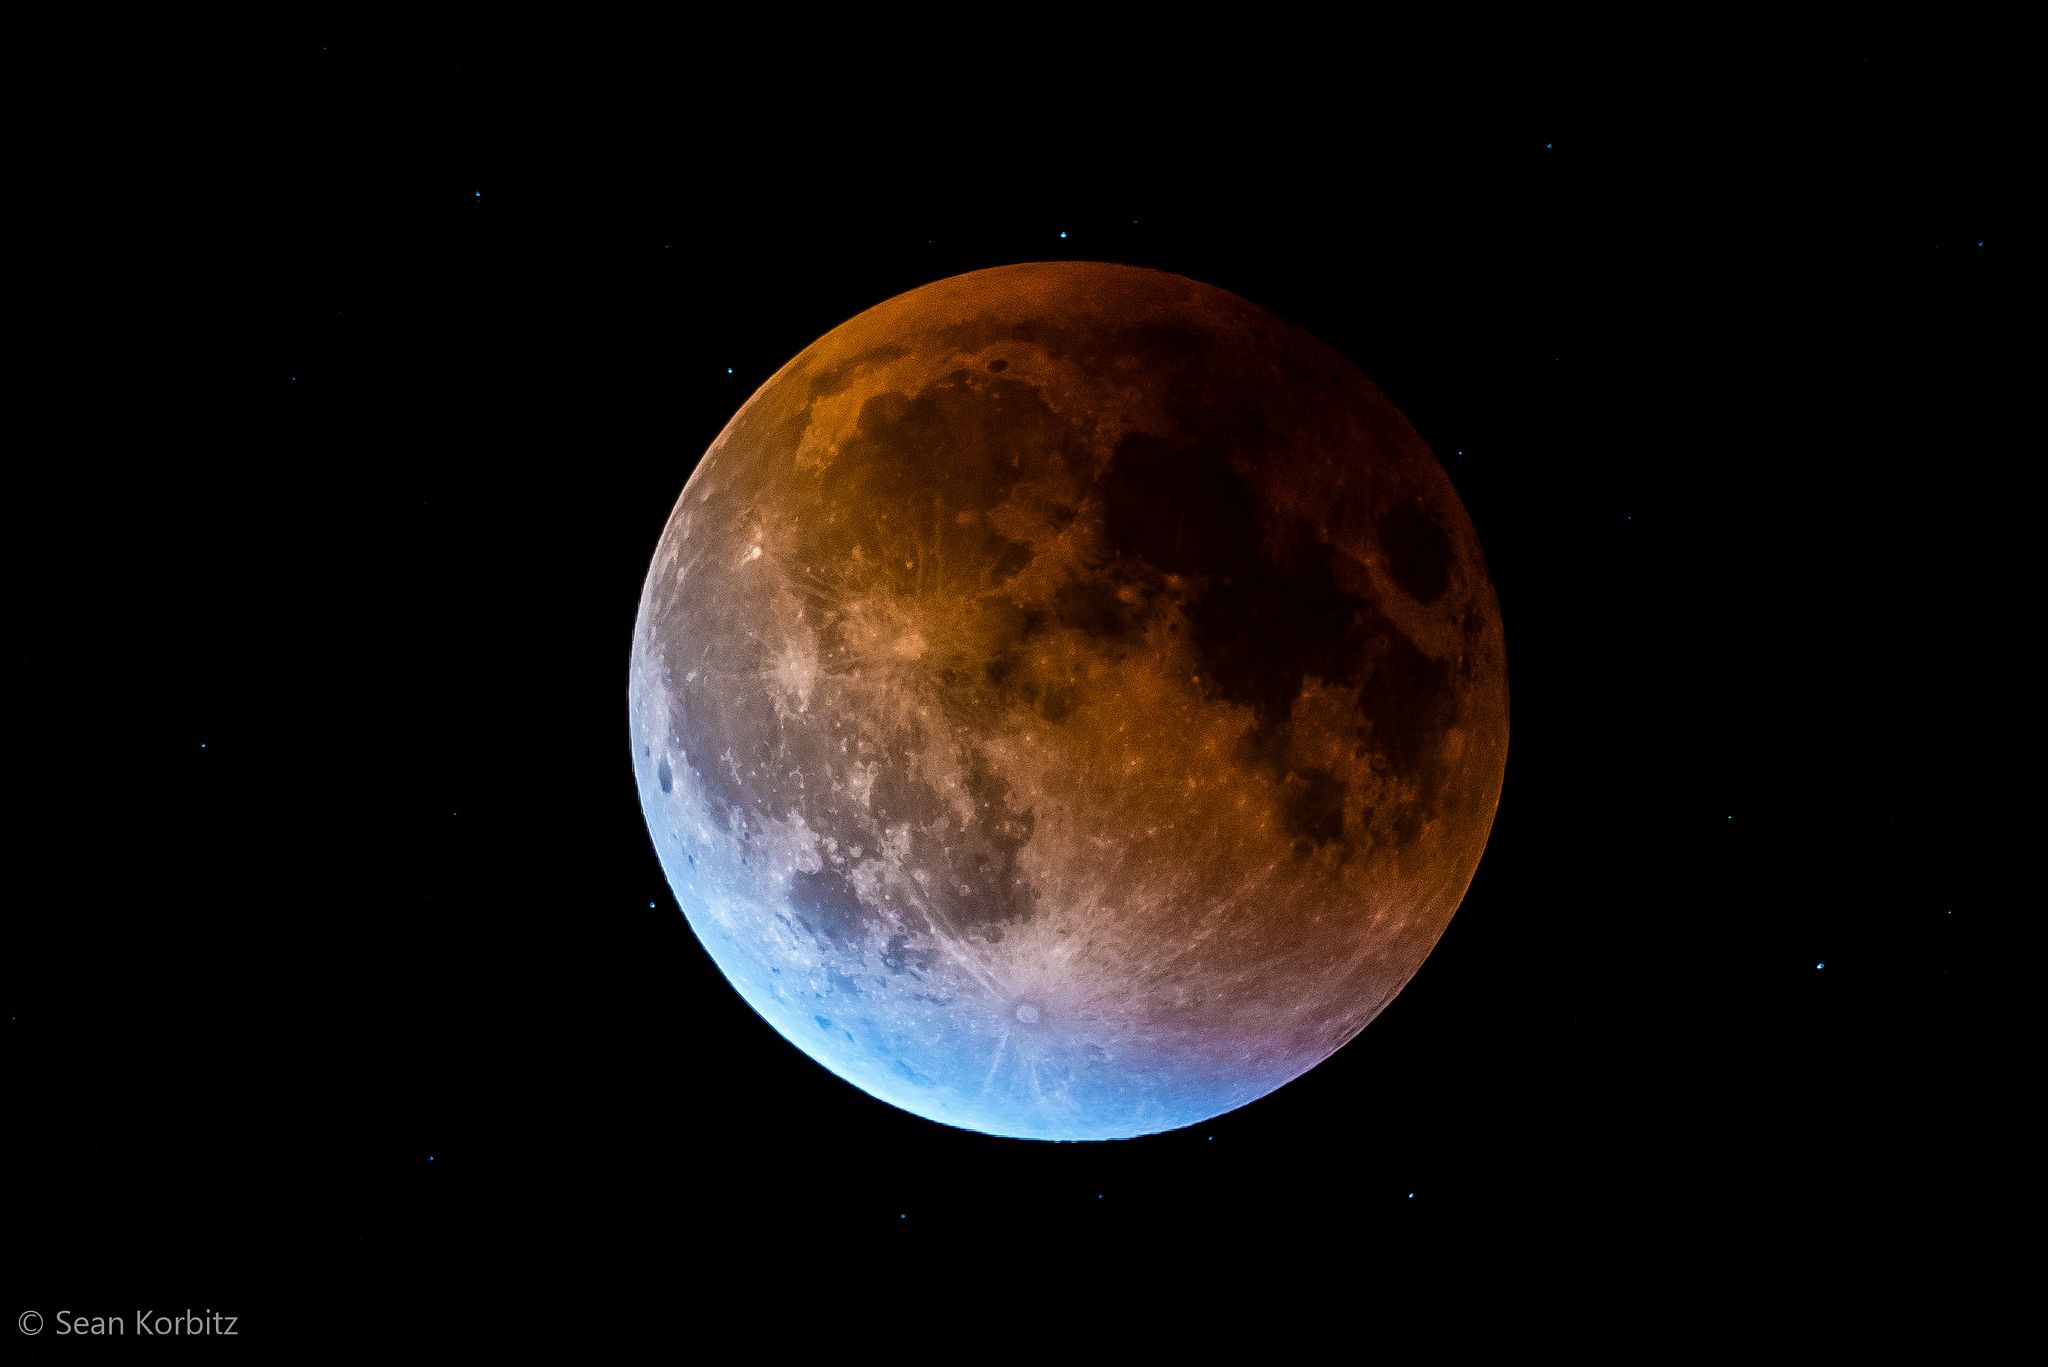 How to View the UltraRare Super Blue Blood Moon in Vietnam Tomorrow